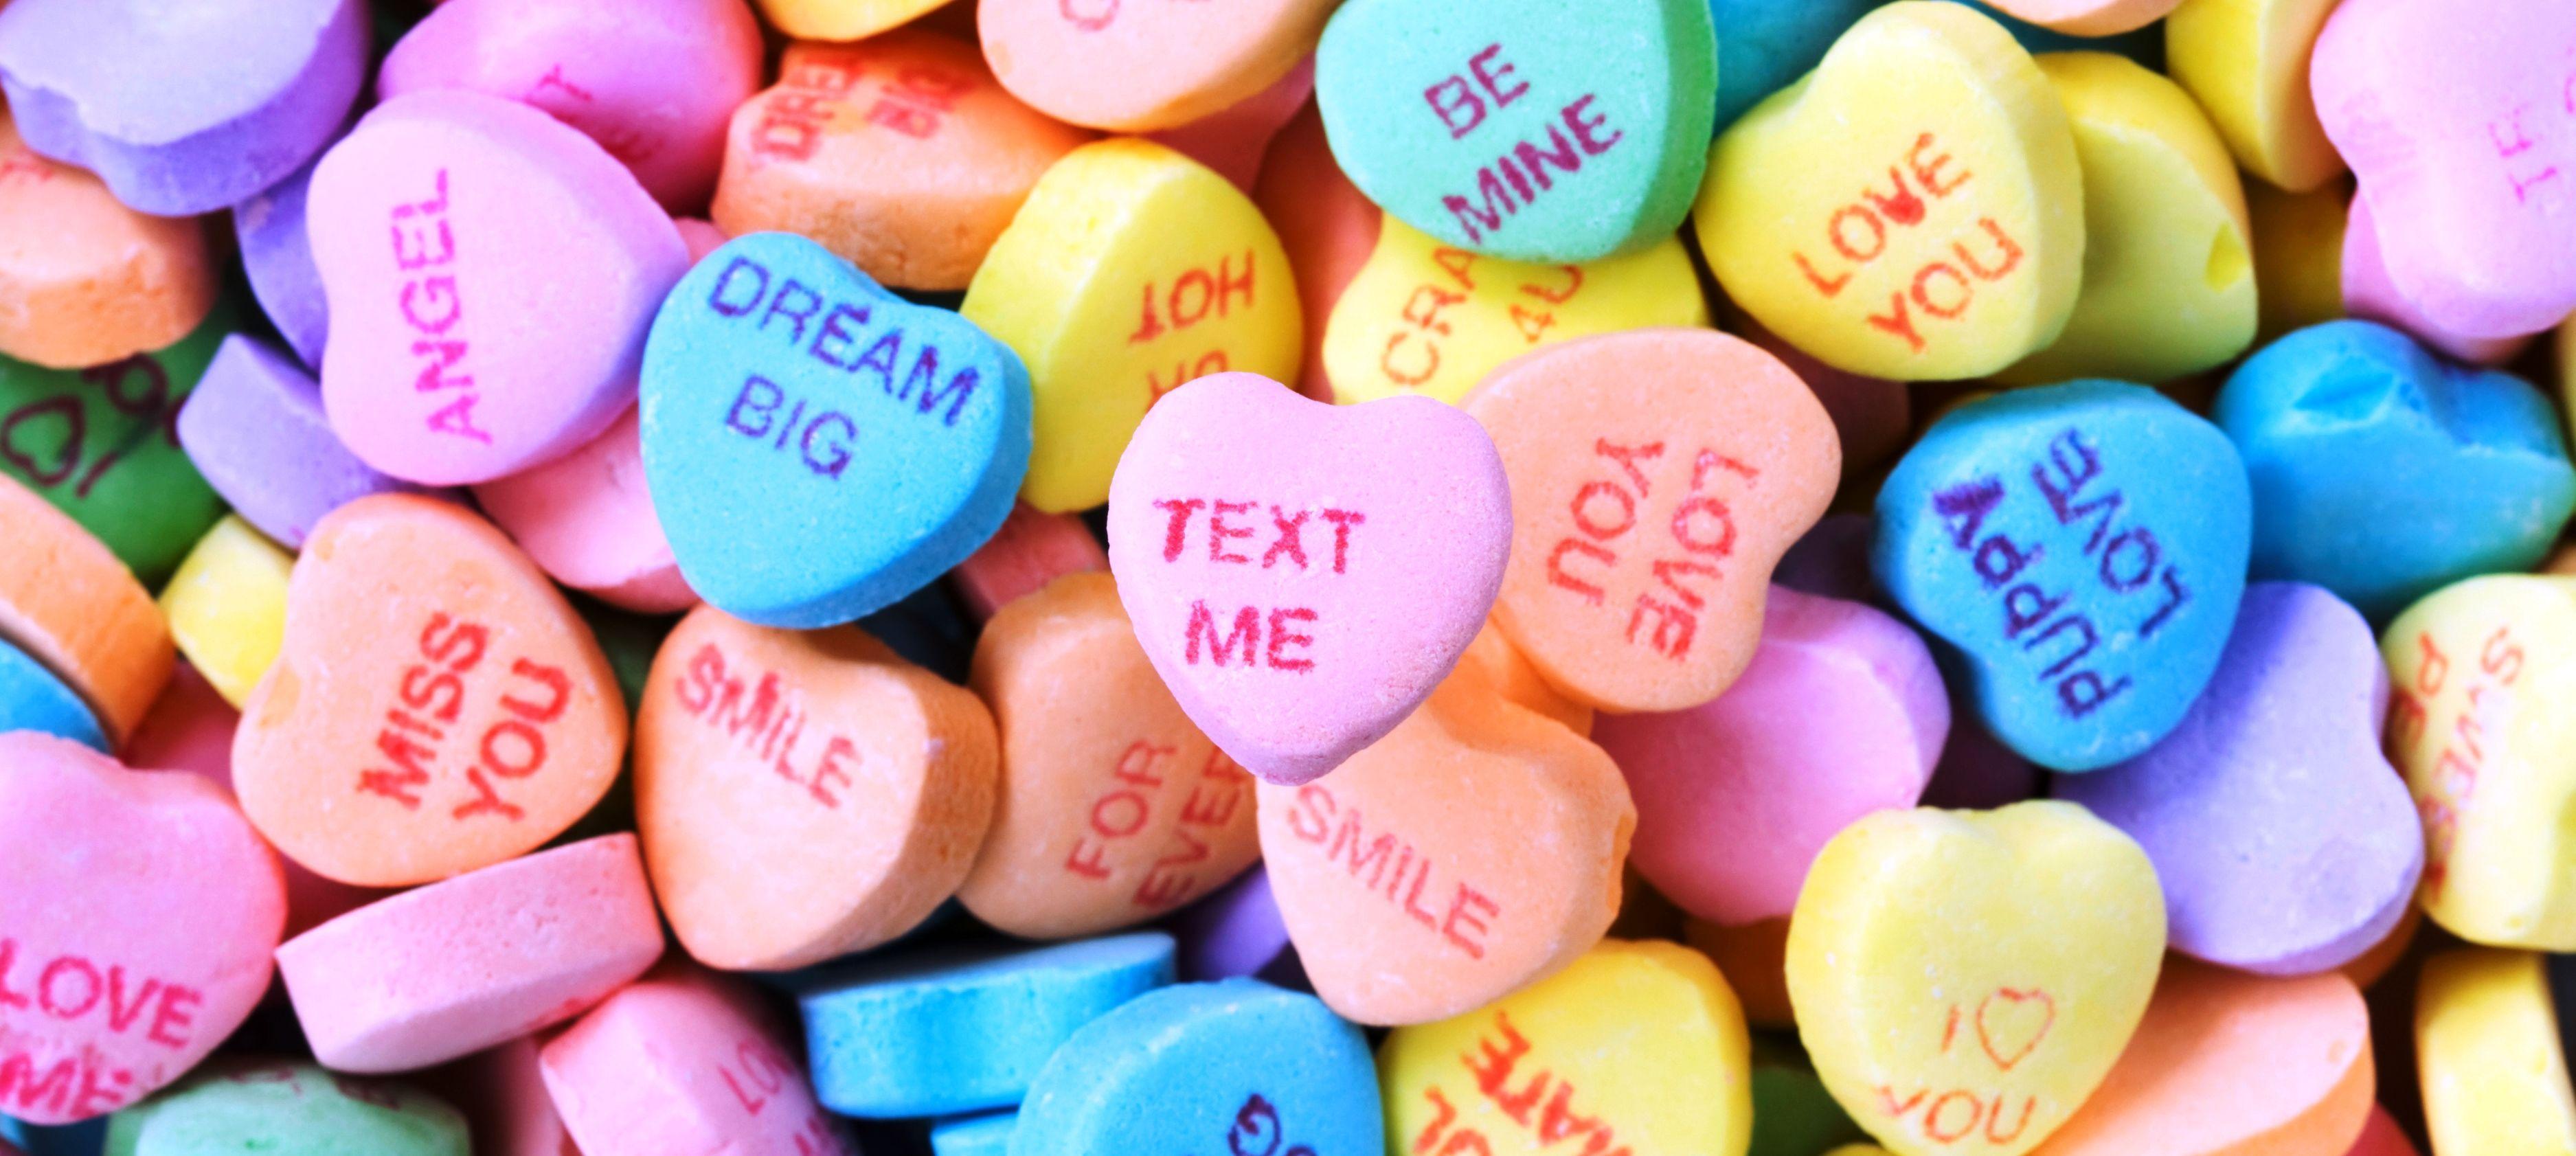 Candy Hearts Wallpapers Top Free Candy Hearts Backgrounds Images, Photos, Reviews